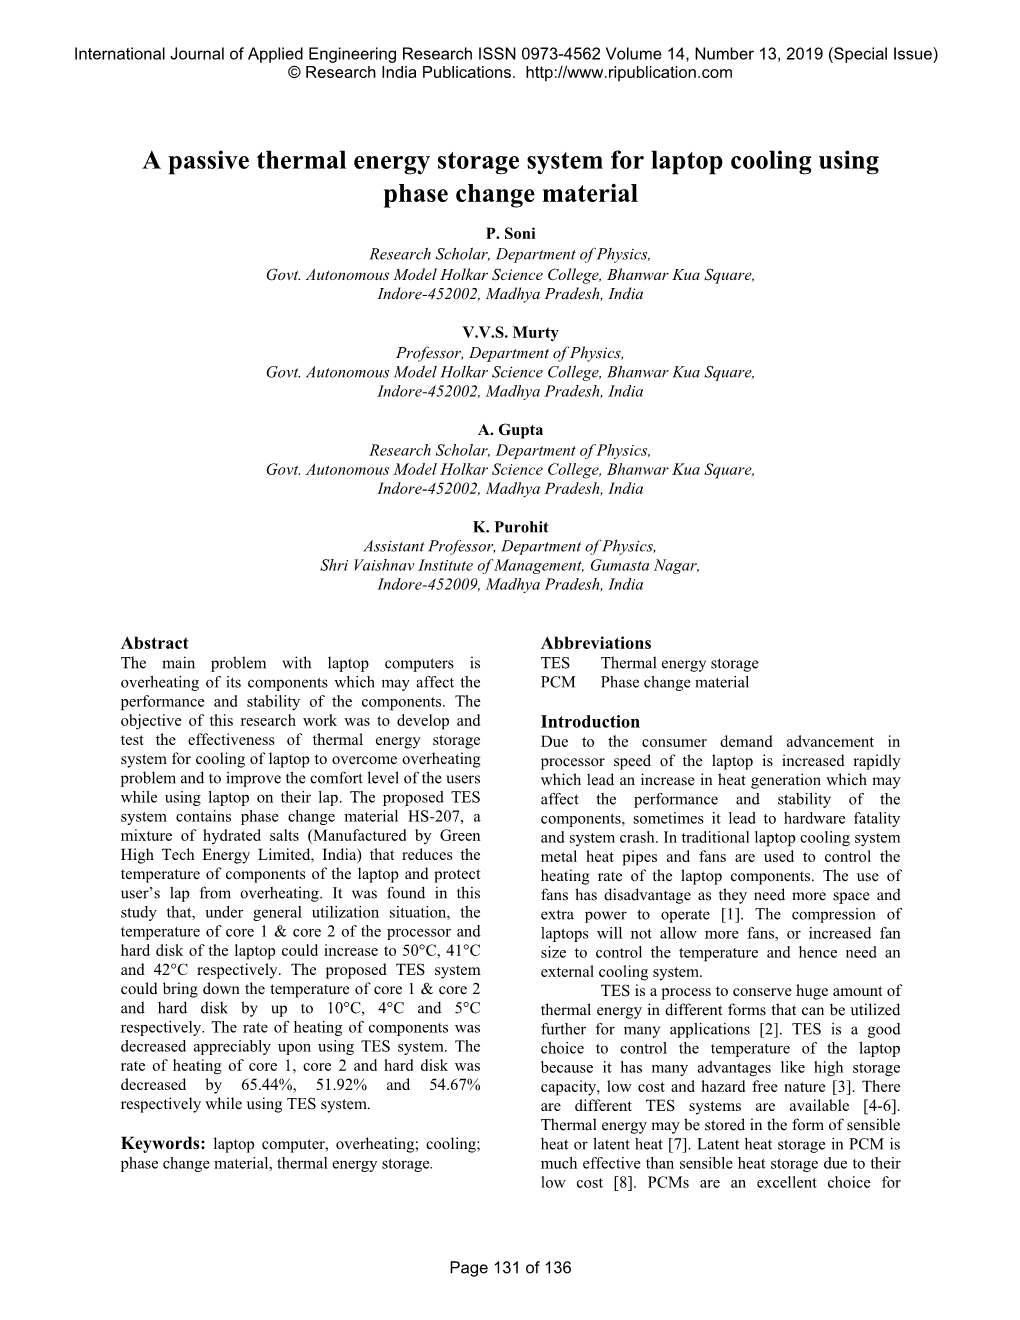 A Passive Thermal Energy Storage System for Laptop Cooling Using Phase Change Material